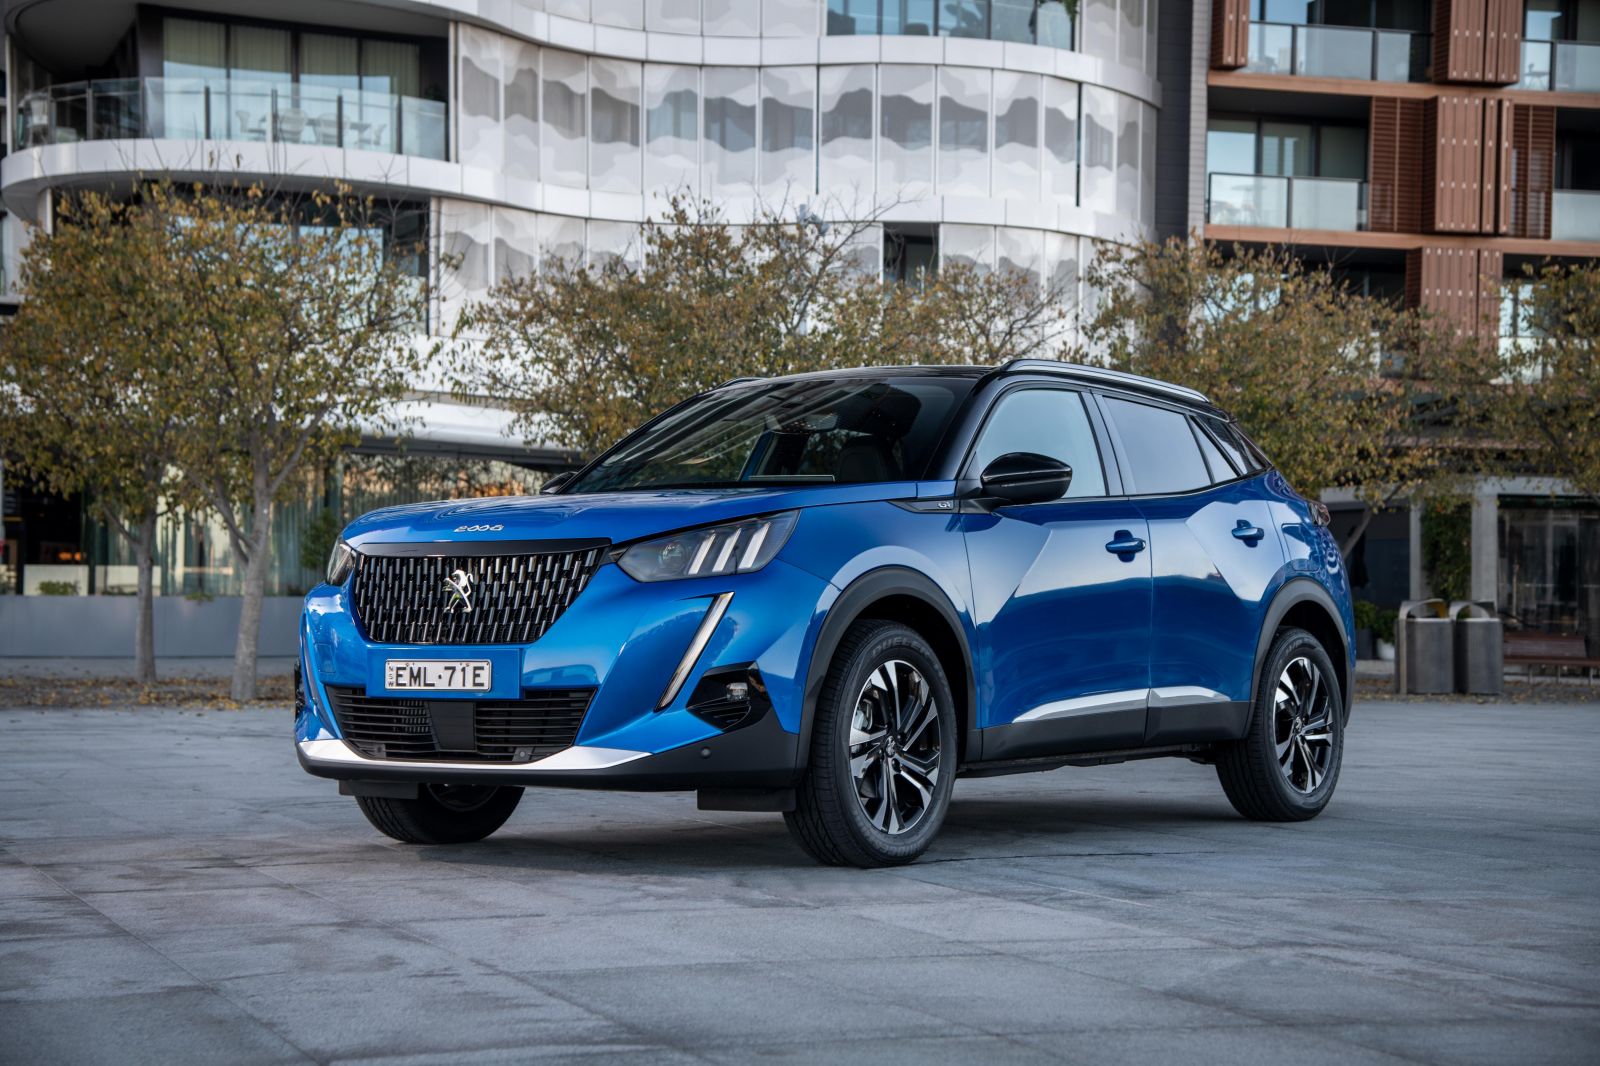 2021 Peugeot 2008 price and specs CarExpert